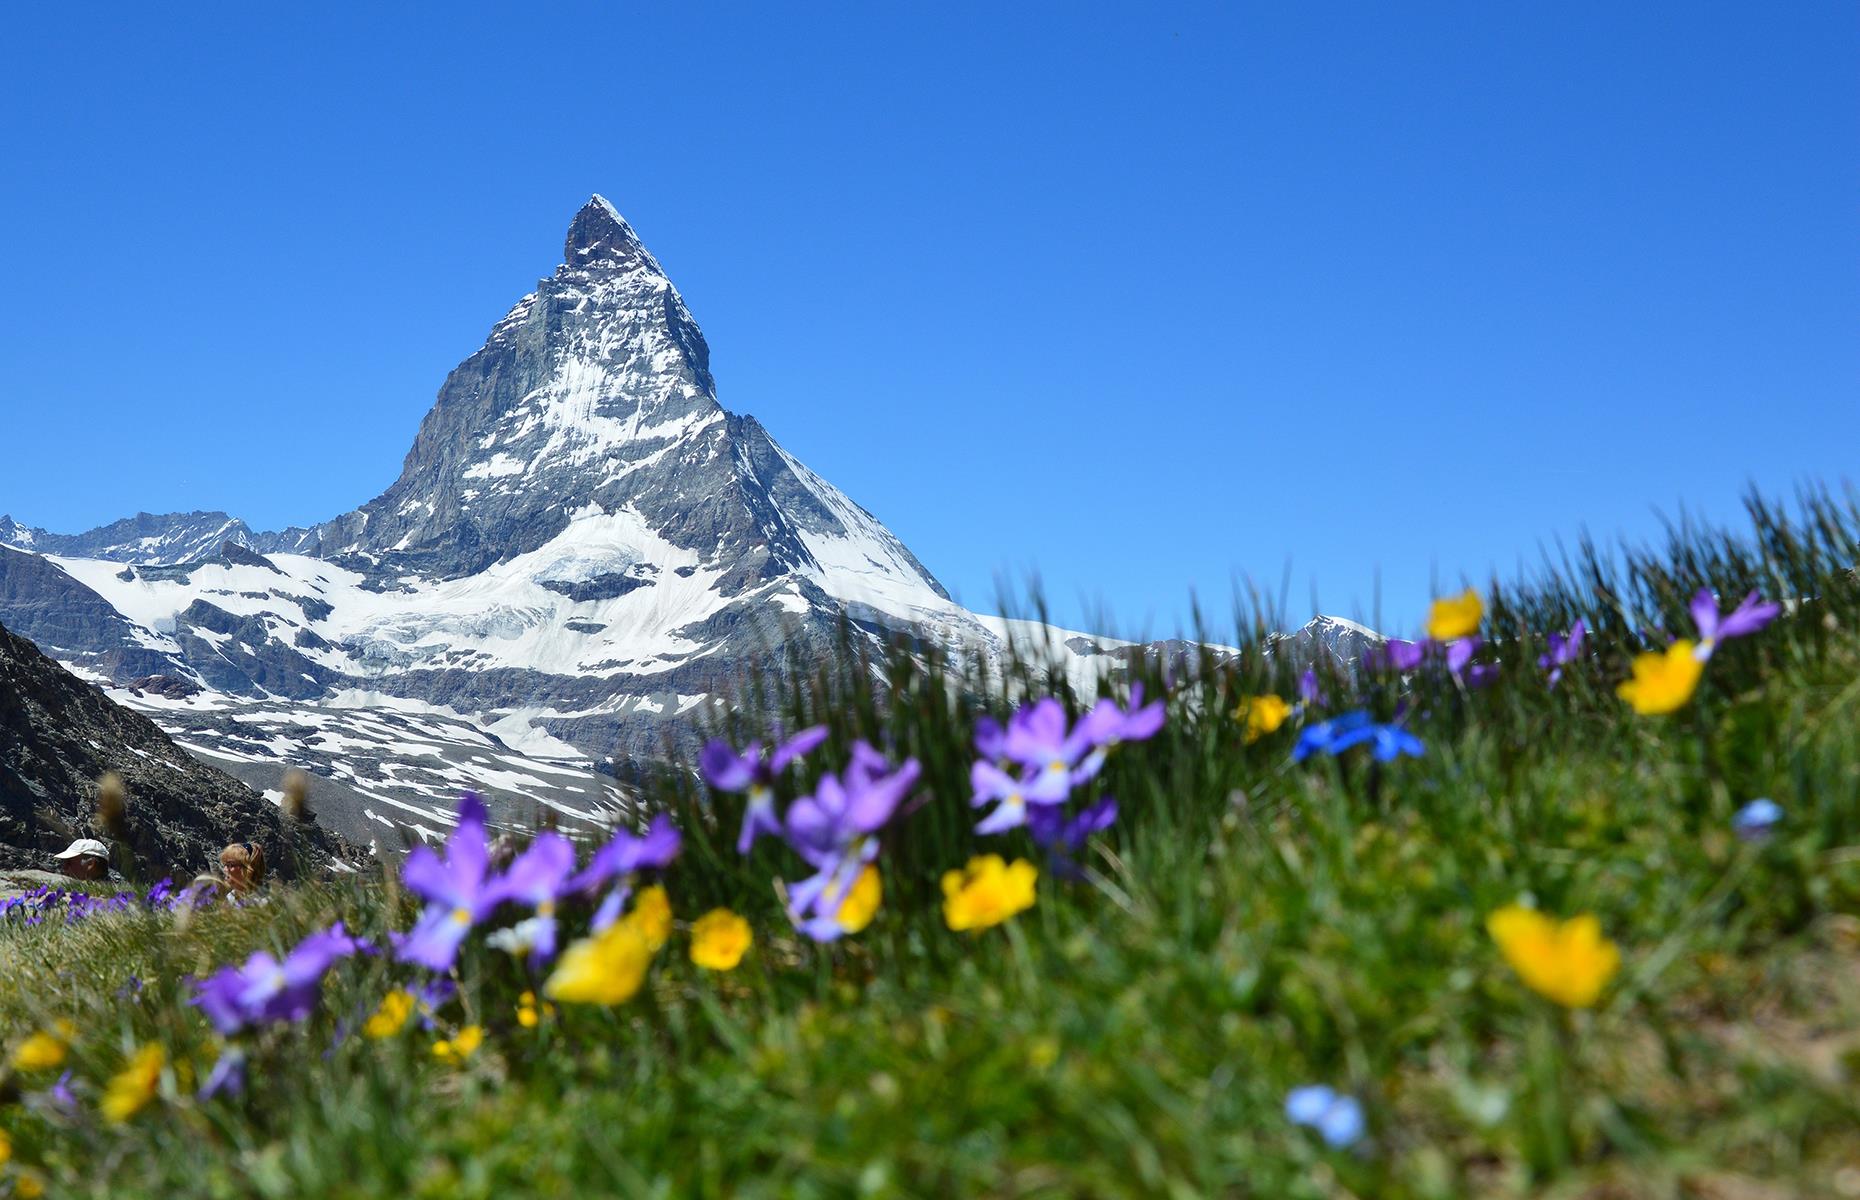 Switzerland has some pretty magical mountains, but the jagged peak of the Matterhorn surely wins hands down. Come at any time of year to Zermatt, where you can ski on the glacier both in winter and summer or explore the mountain trails on foot or by bike. Check out the underrated Matterhorn Museum, which tells the story of the many attempts to reach the summit.